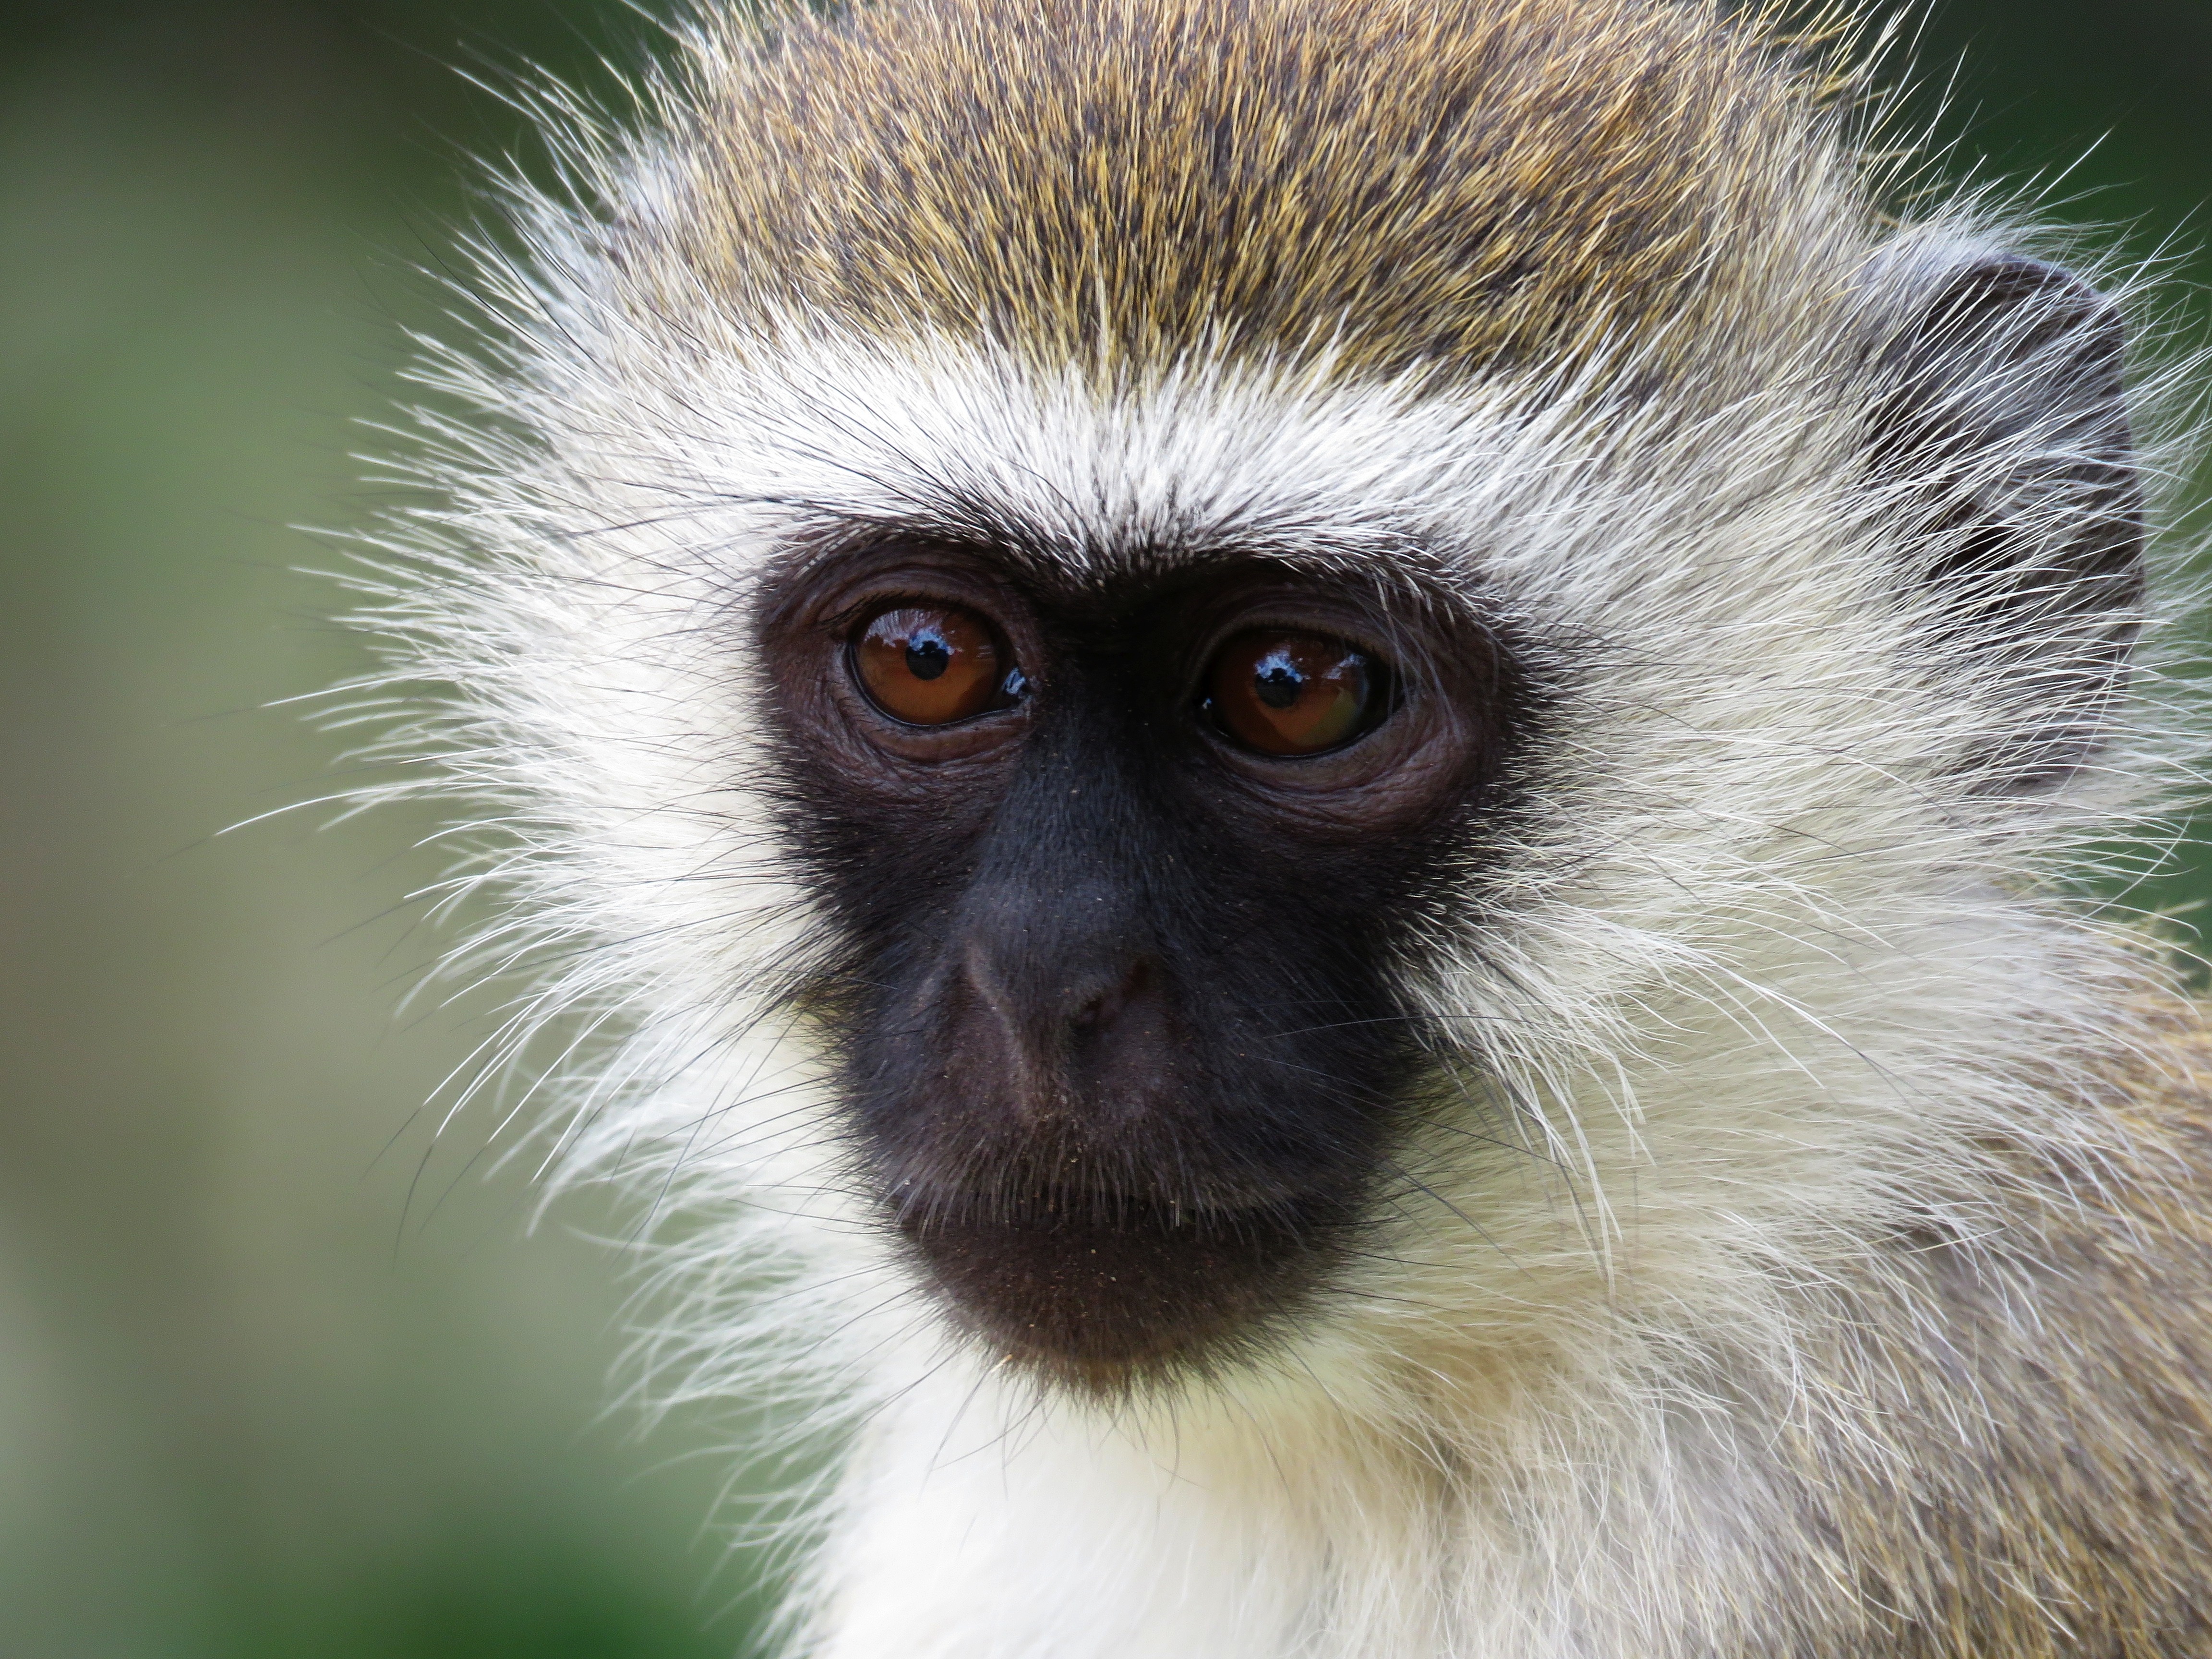 TOURISTS WARNED NOT TO FEED WILD MONKEYS AS THEY COULD LOSE THEIR FUR